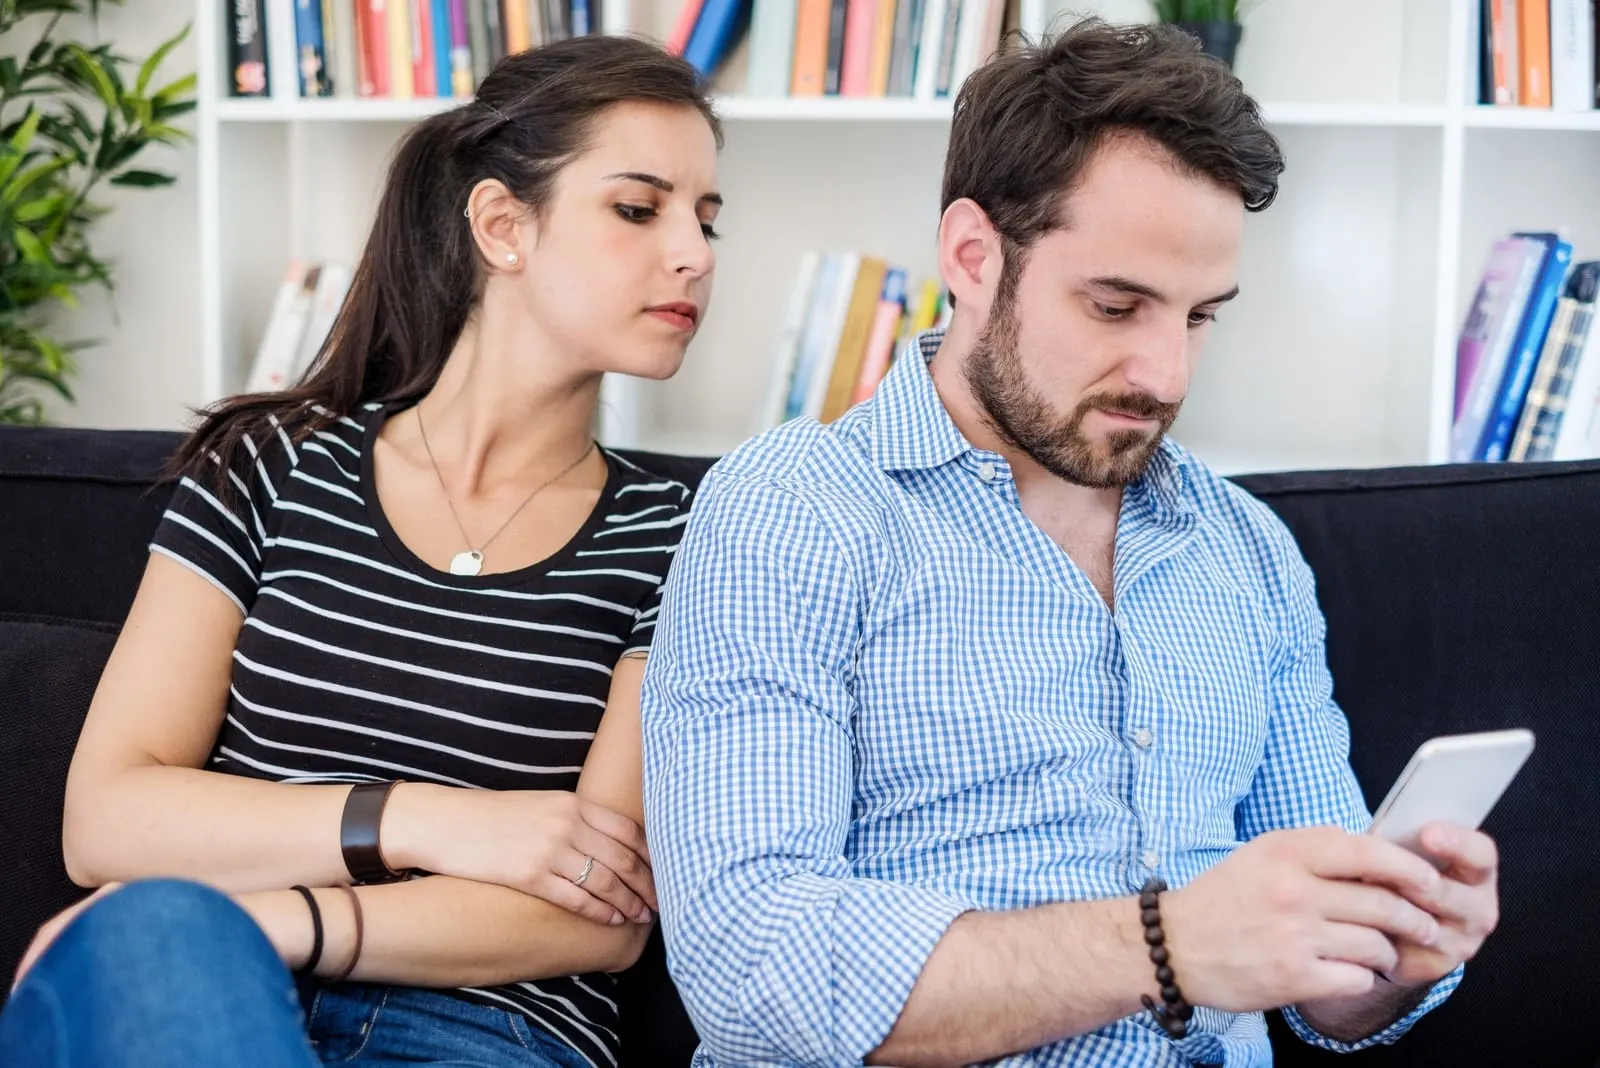 woman looking at man's phone while sitting on sofa